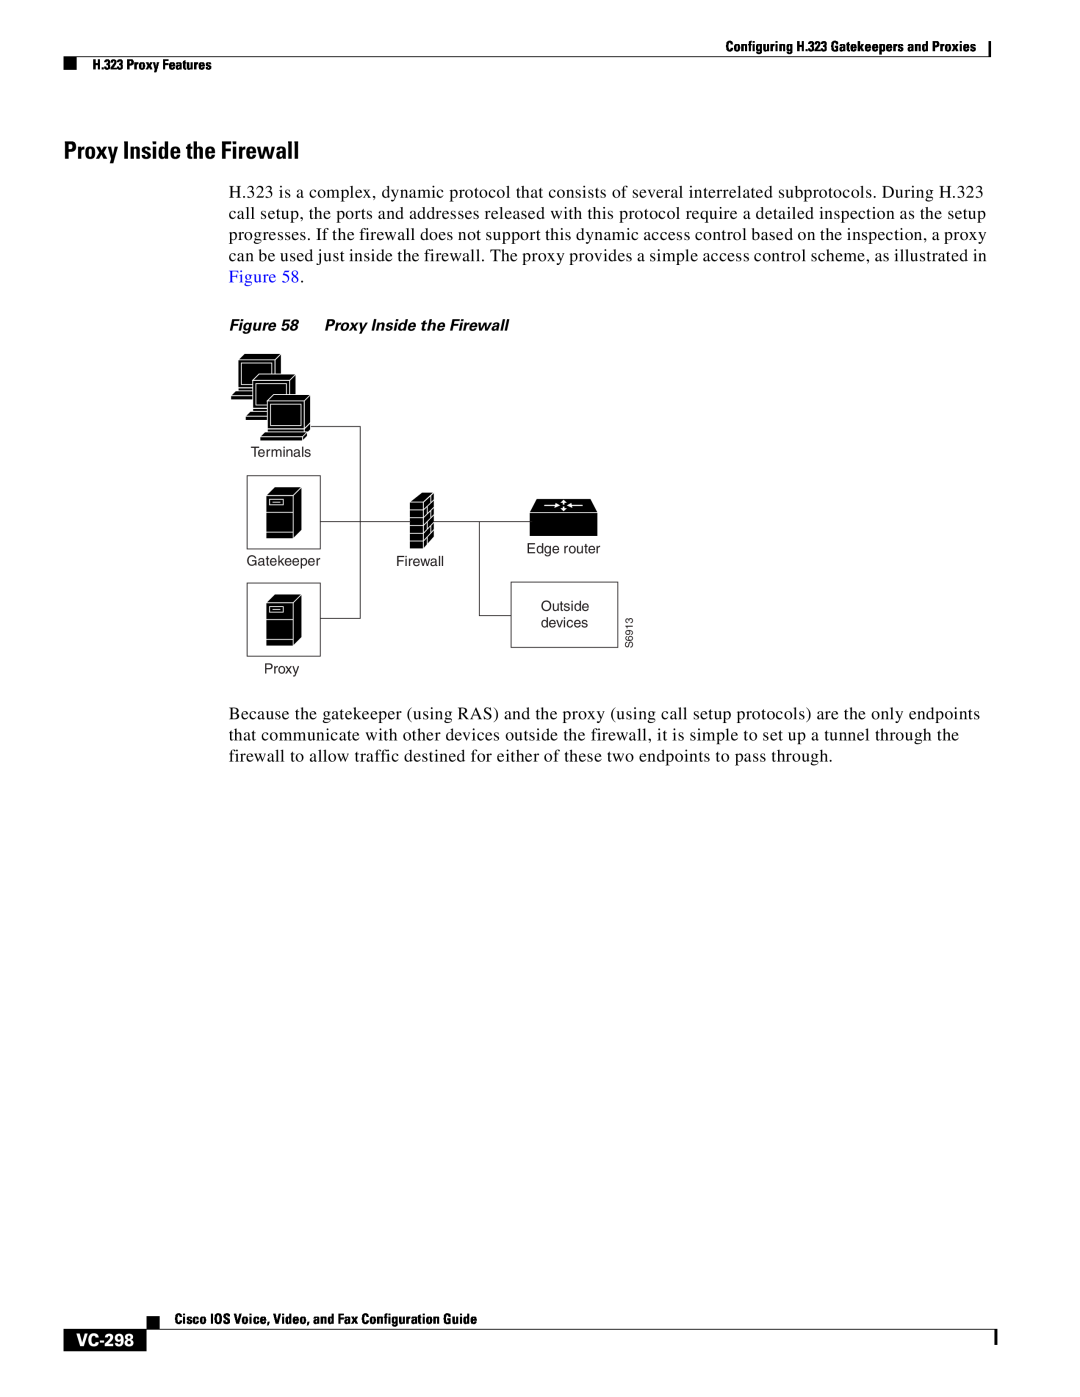 Cisco Systems VC-289 manual Proxy Inside the Firewall, VC-298 